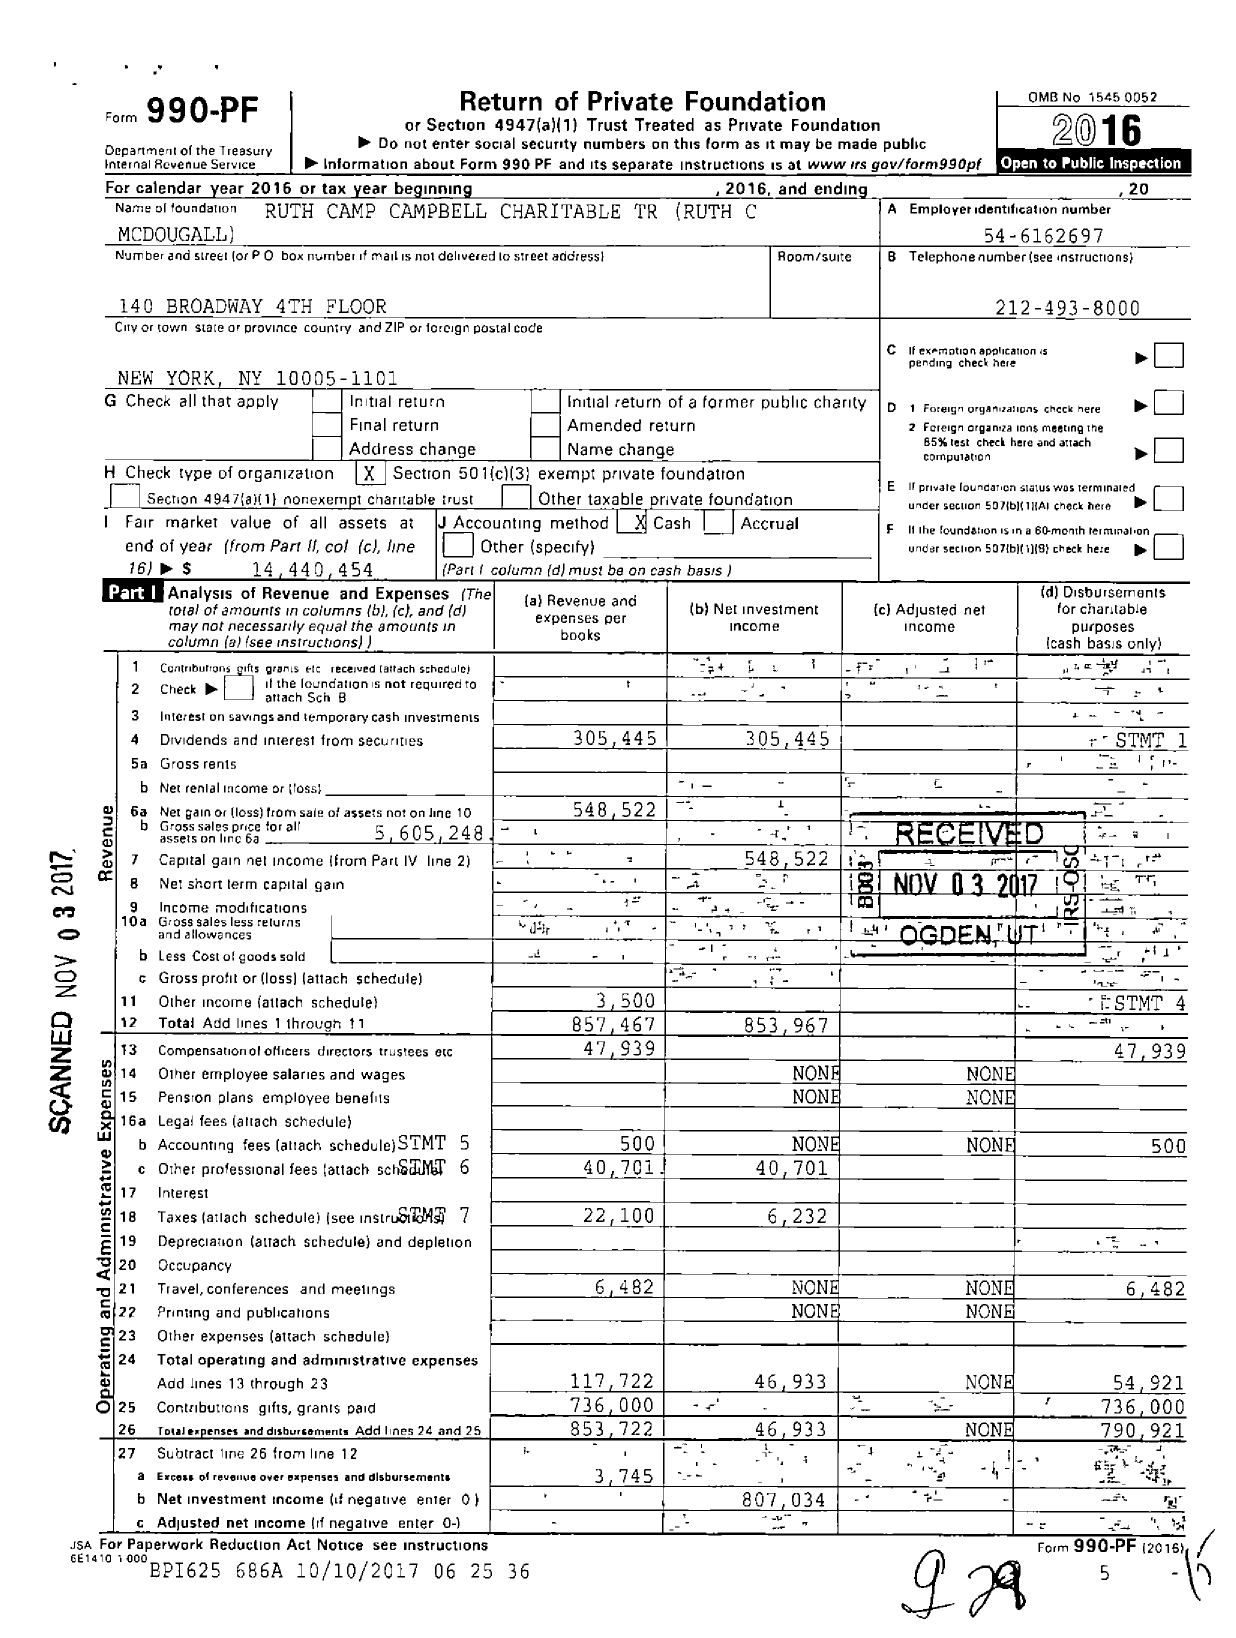 Image of first page of 2016 Form 990PF for Ruth Camp Campbell Charitable Trust